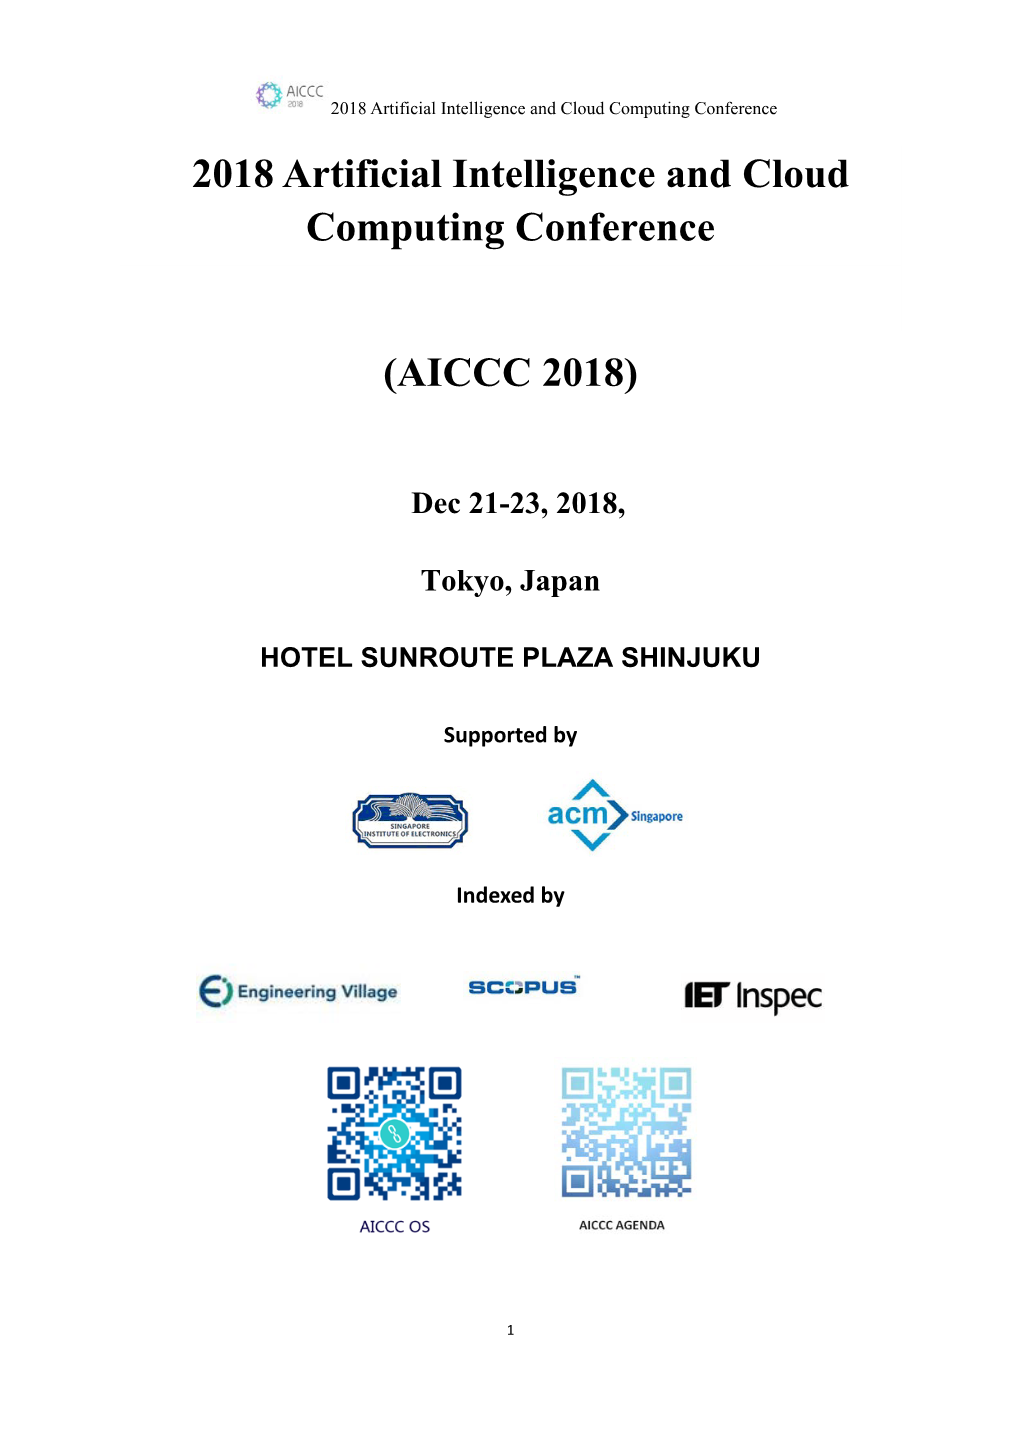 2018 Artificial Intelligence and Cloud Computing Conference (AICCC 2018)